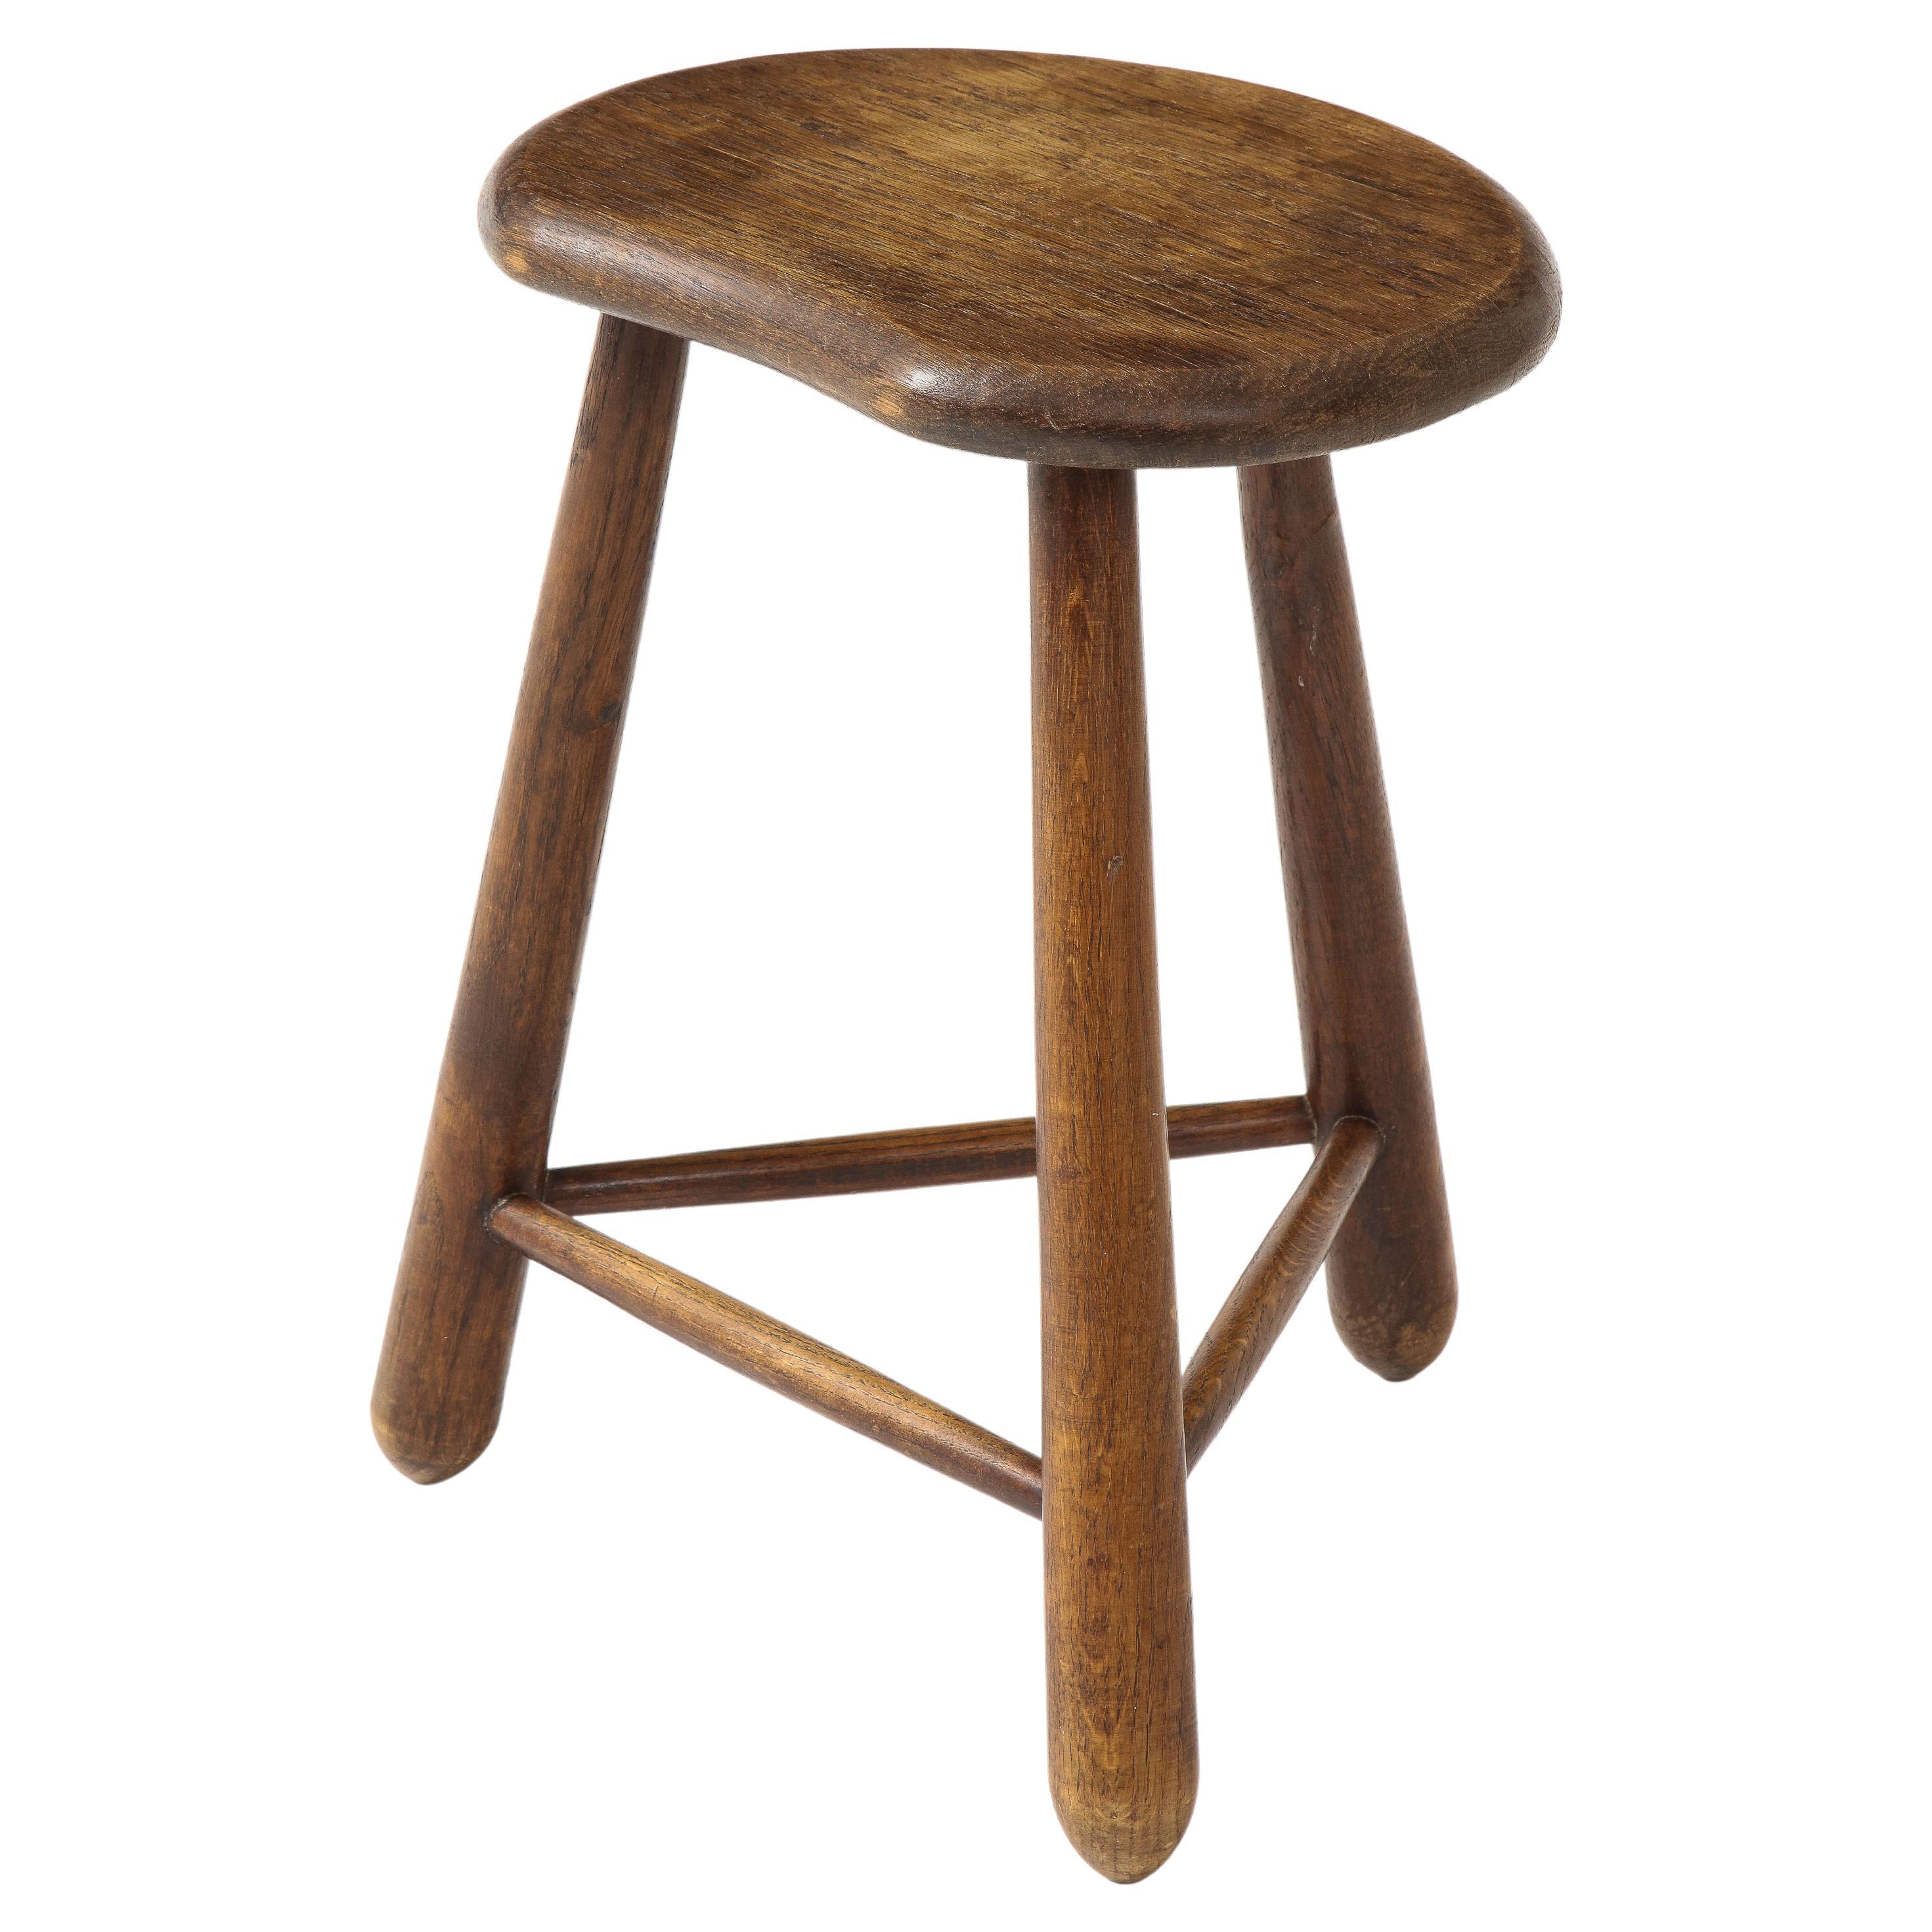 Curious French Oak Stool, c. 1950